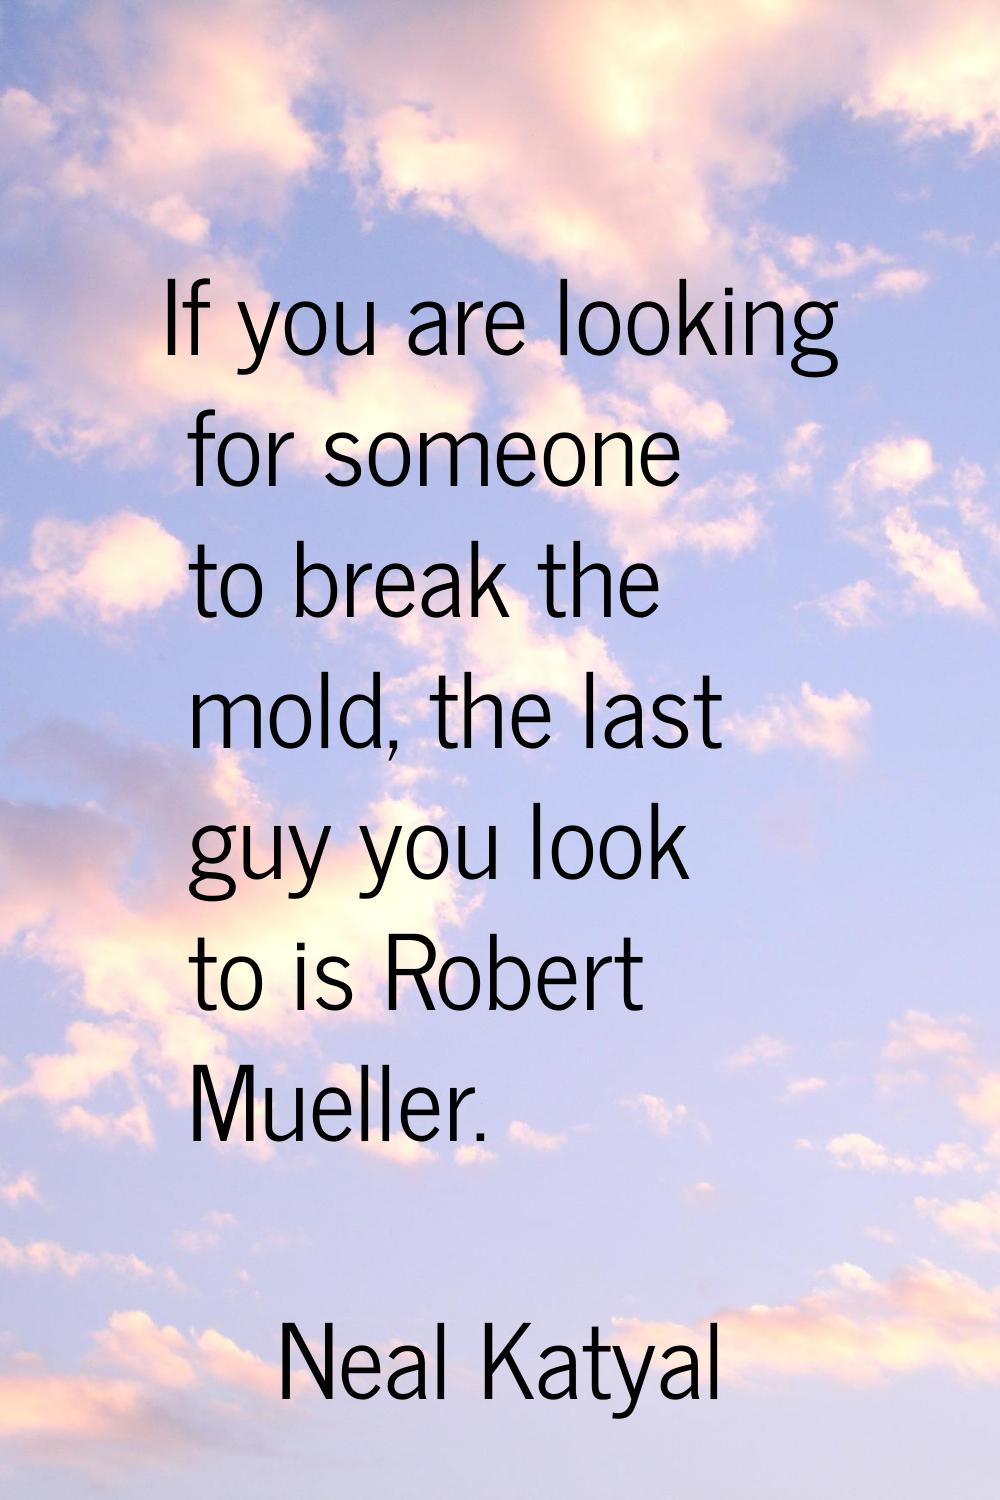 If you are looking for someone to break the mold, the last guy you look to is Robert Mueller.